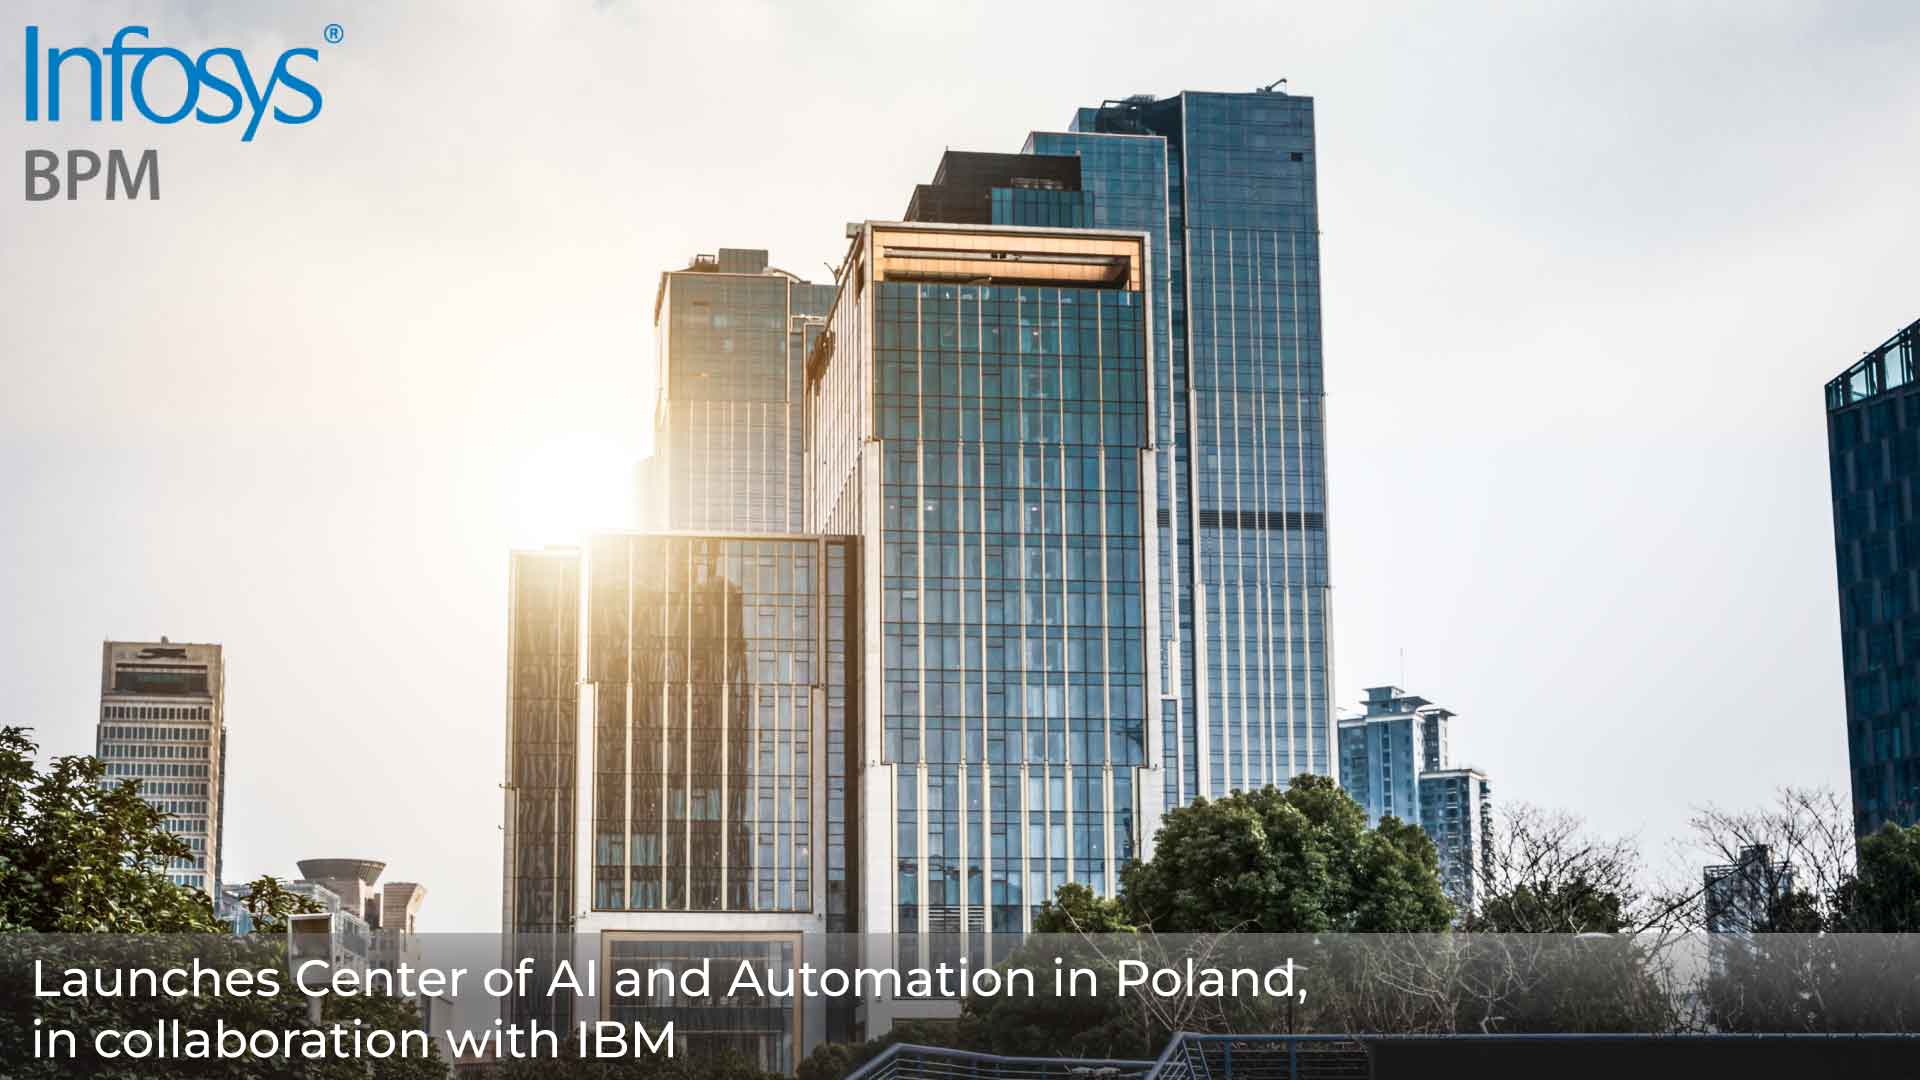 Infosys BPM Launches State-of-the-art Center of AI and Automation in Poland, in Collaboration with IBM